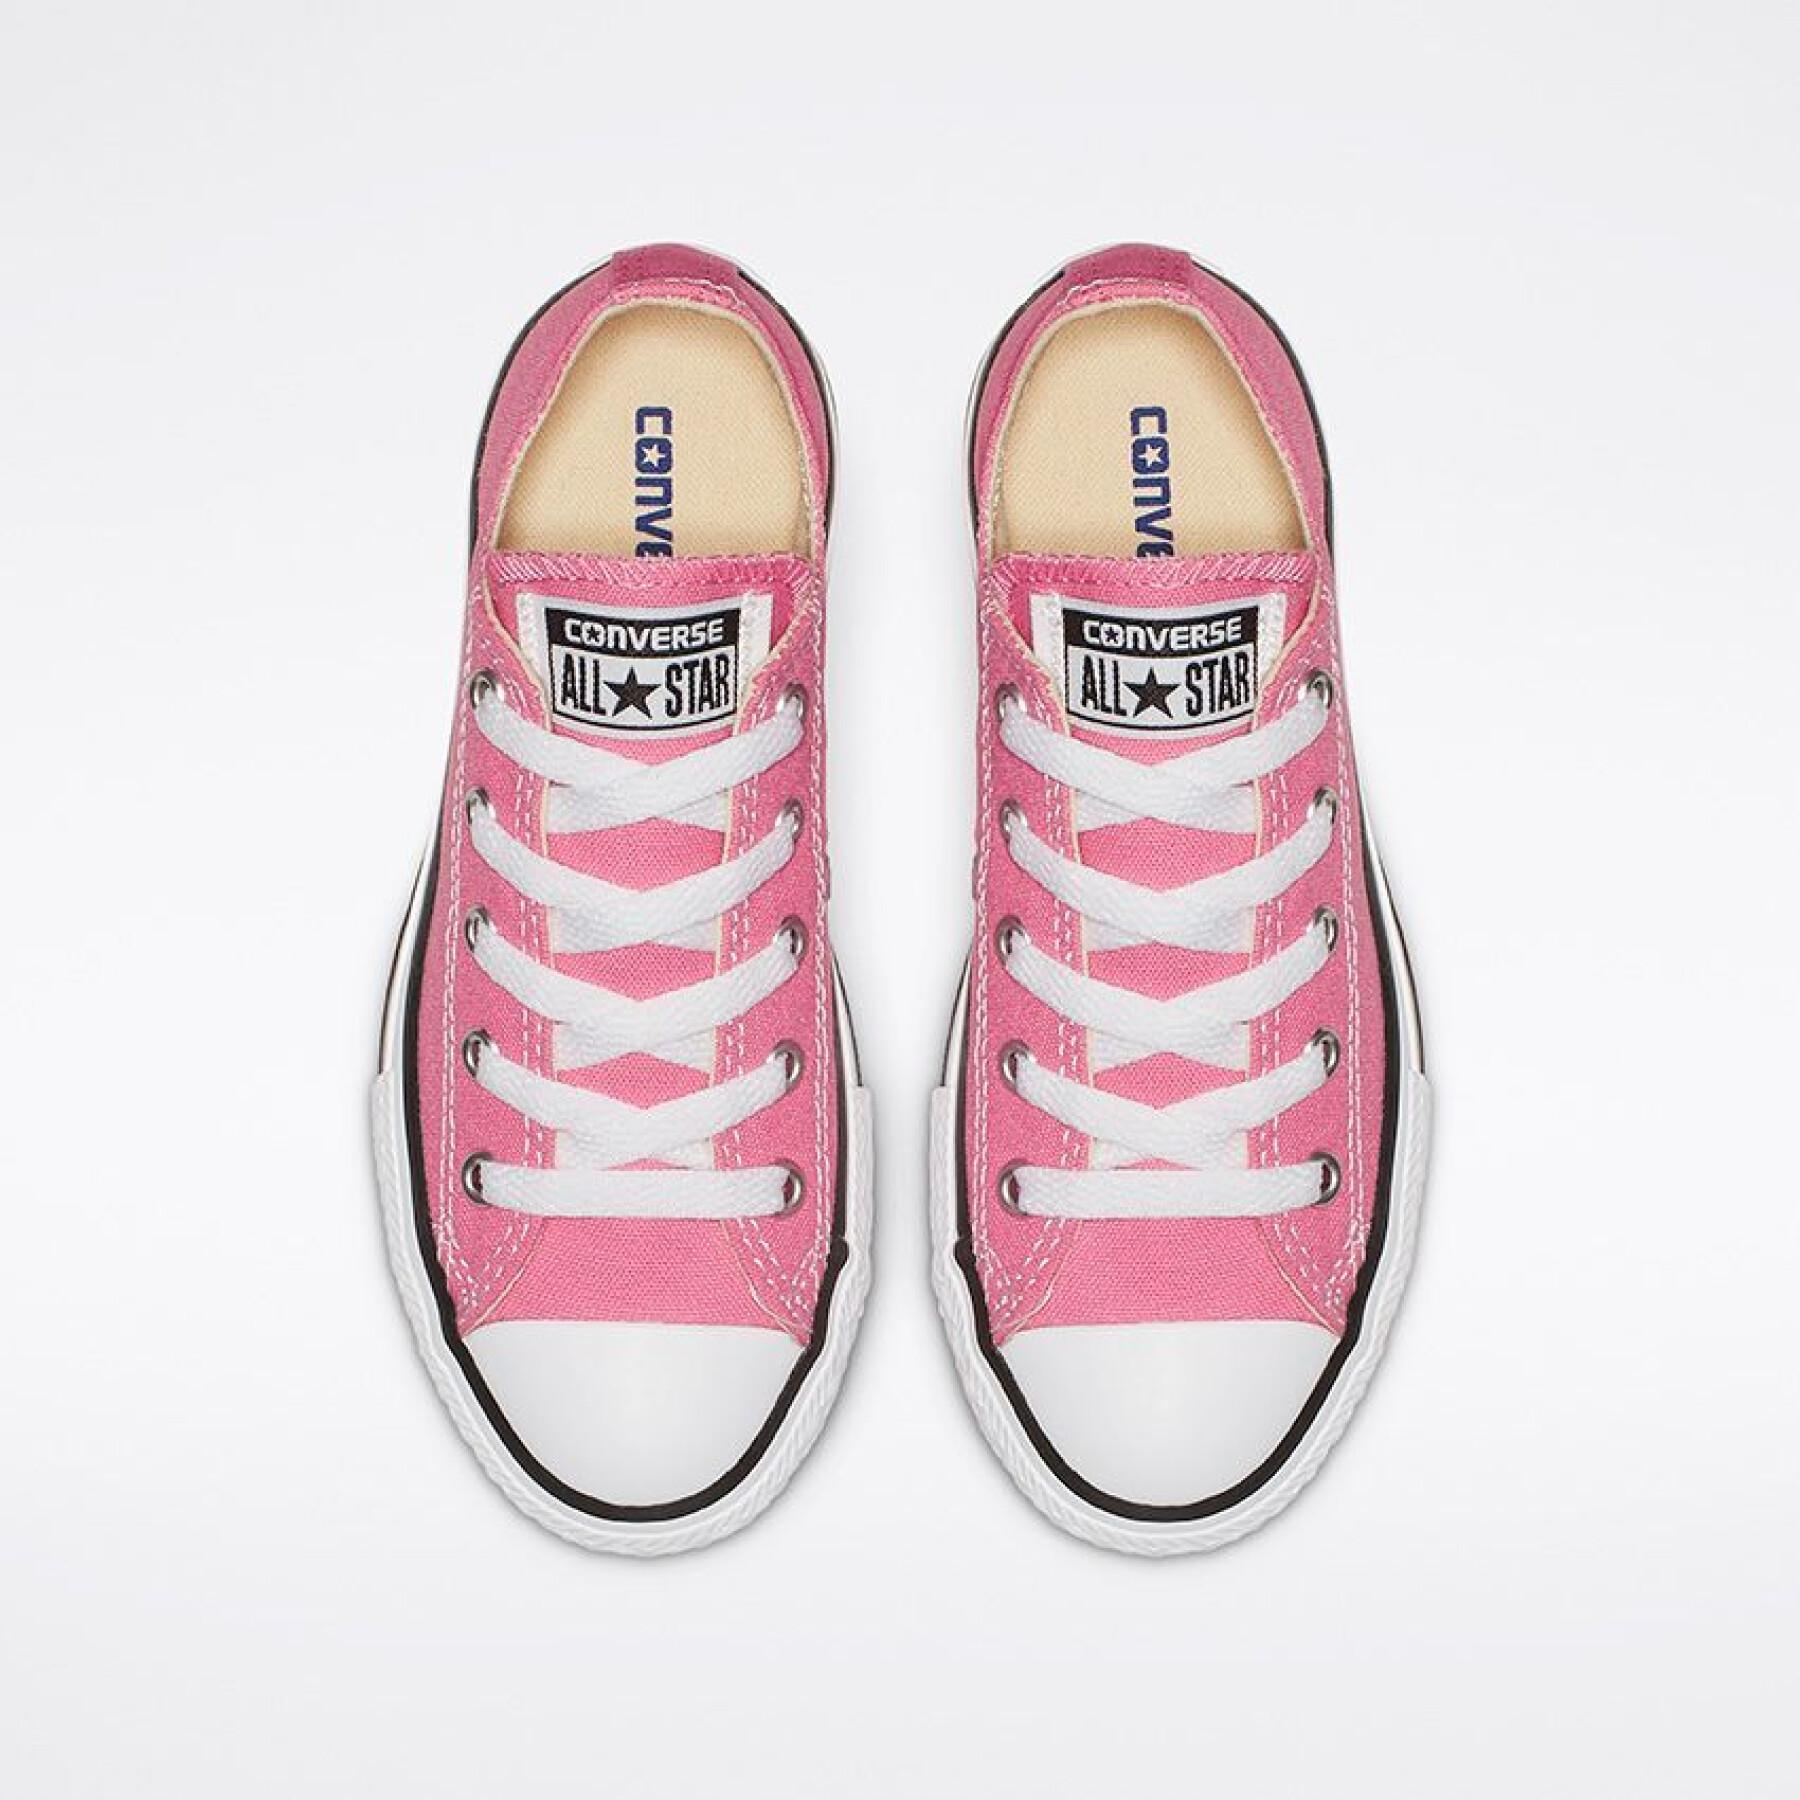 Children's sneakers Converse Chuck Taylor All Star